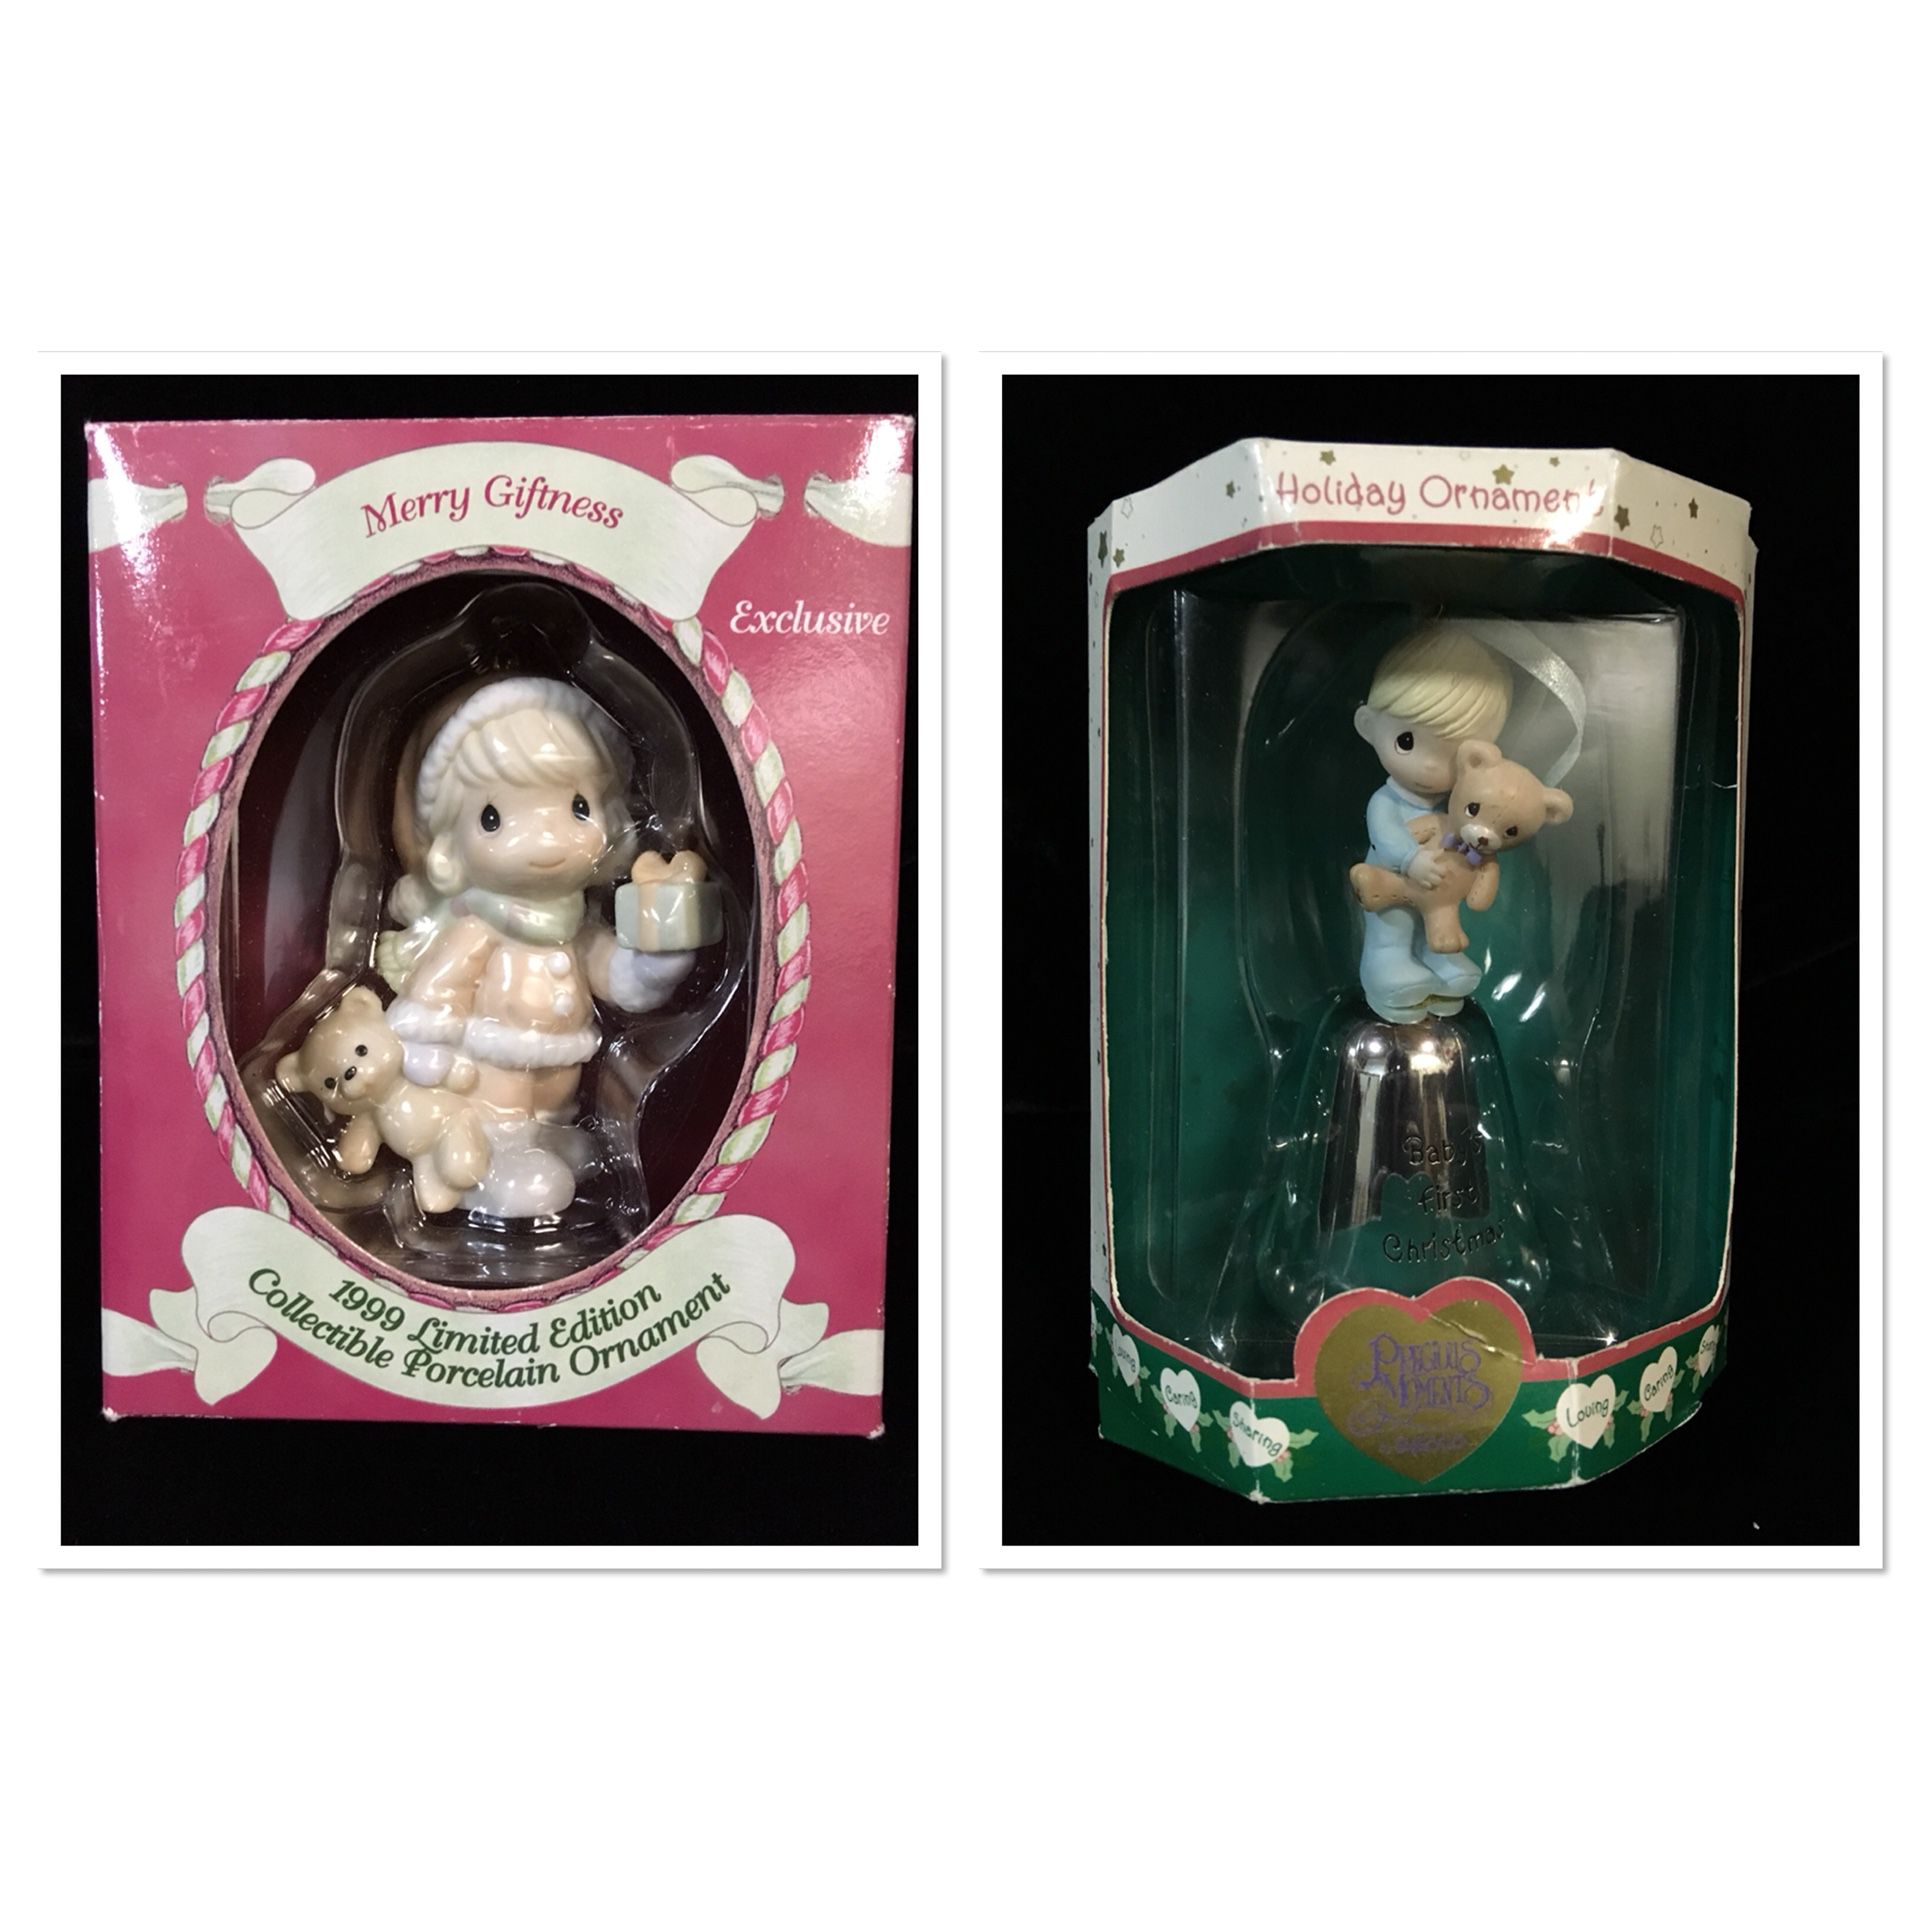 New in boxes - Precious Moments Christmas ornaments